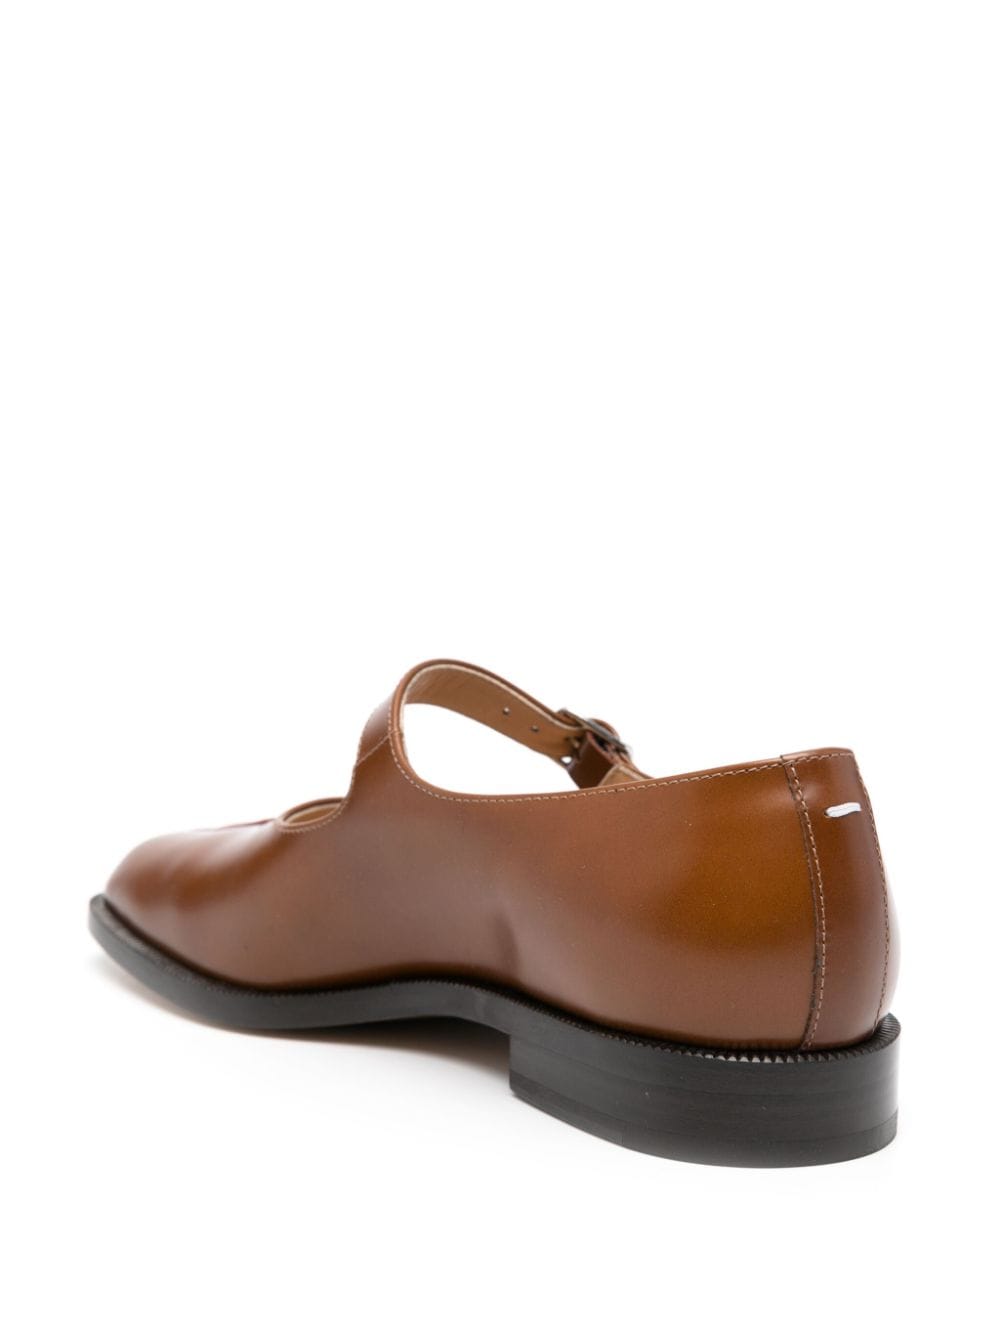 Shop Maison Margiela Tabi Mary Jane Leather Pumps In Brown